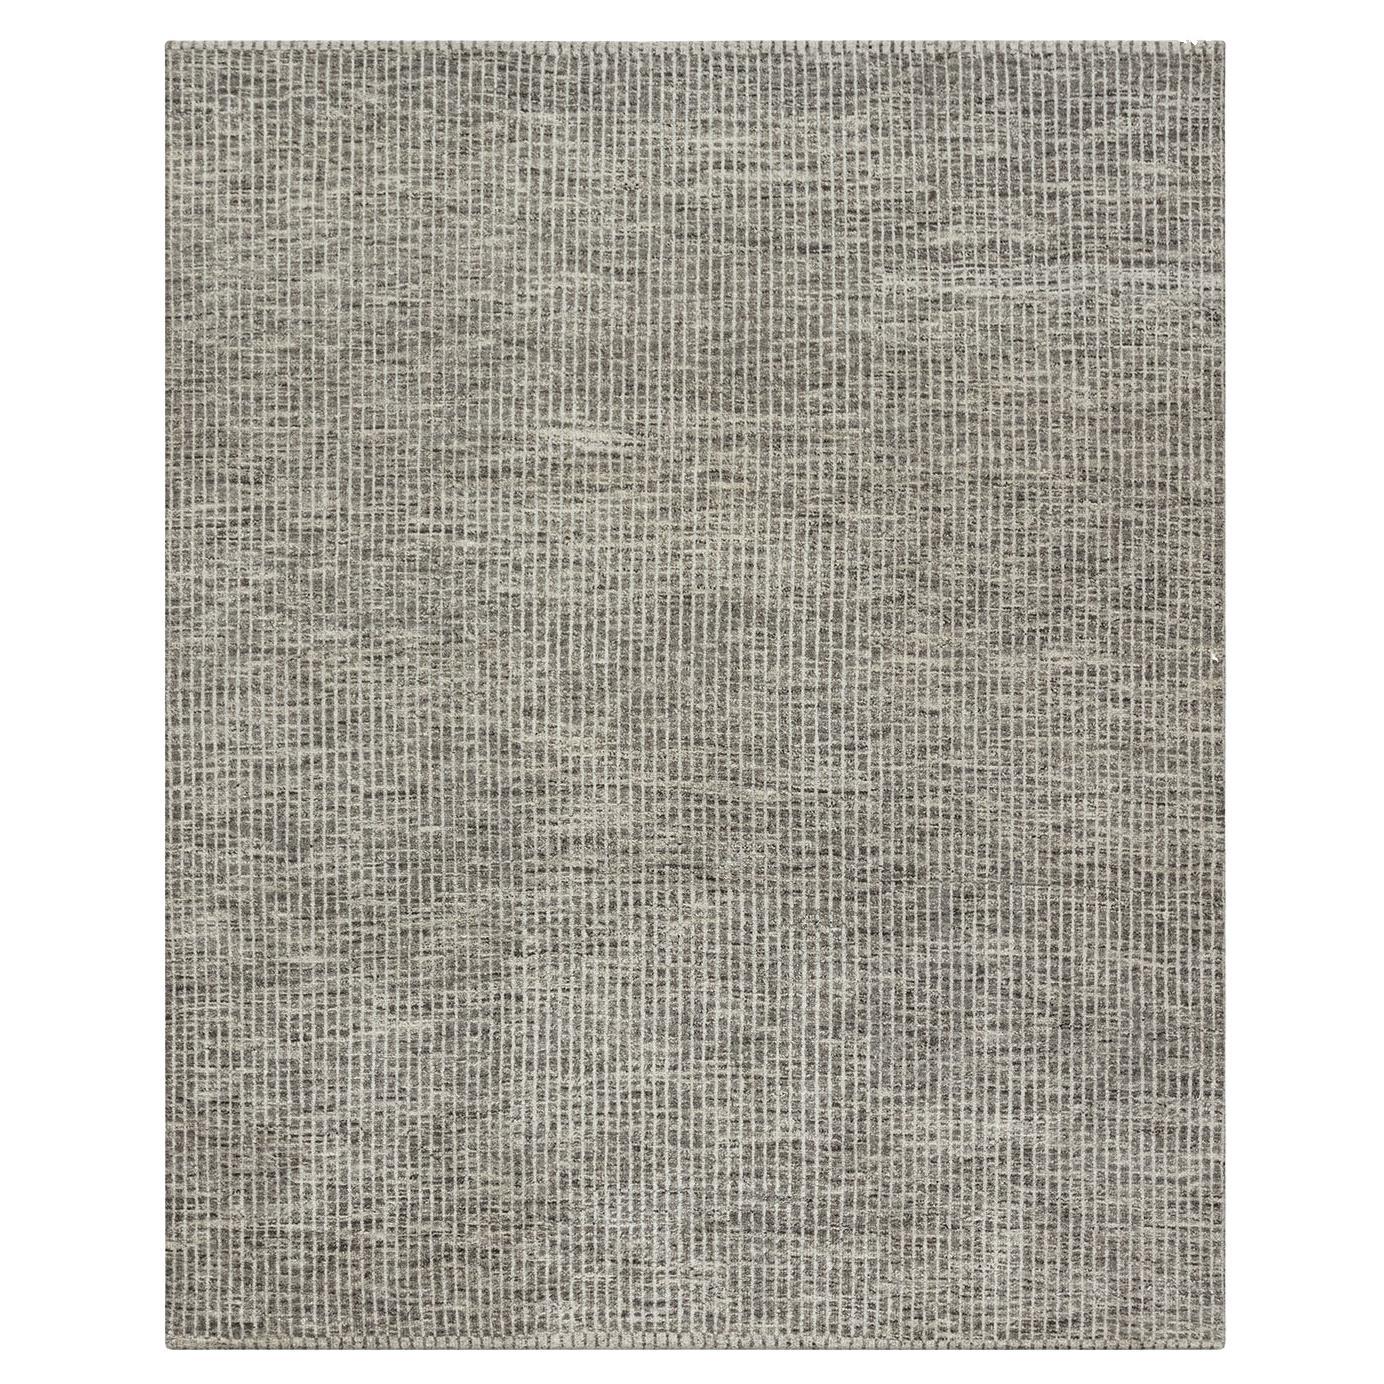 Organic Night Contemporary Area Rug  9'x12' For Sale